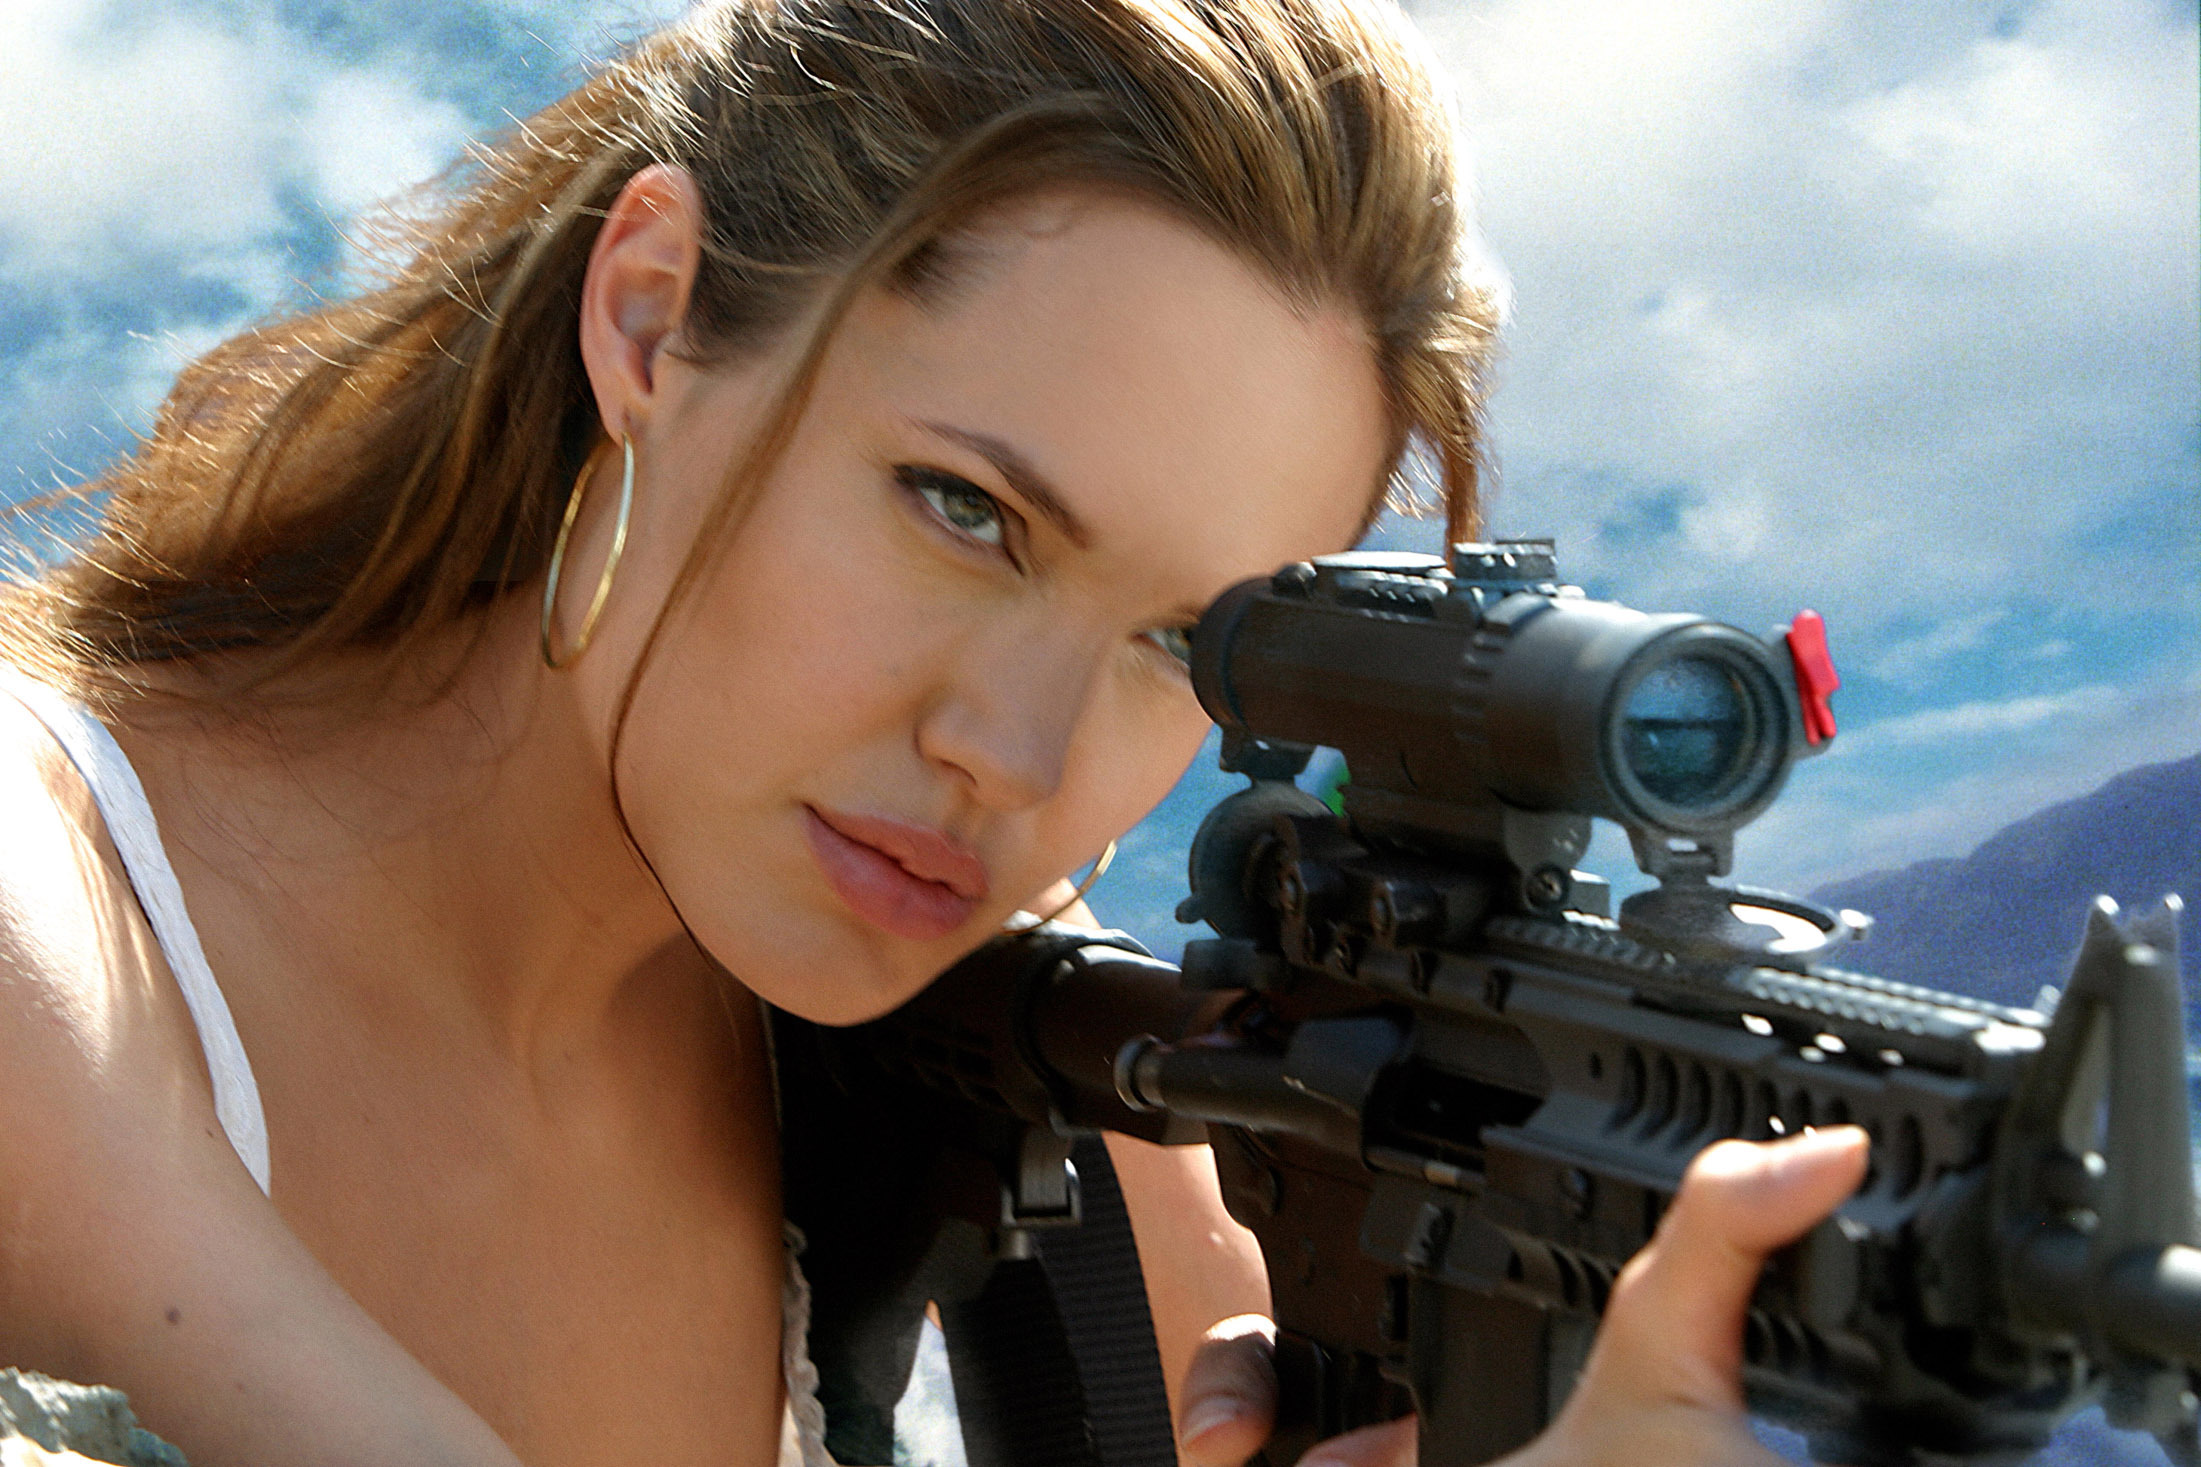 mr and mrs smith, Romantic, Comedy, Action, Mrs, Smith, Angelina, Jolie, Weapon, Gun Wallpaper